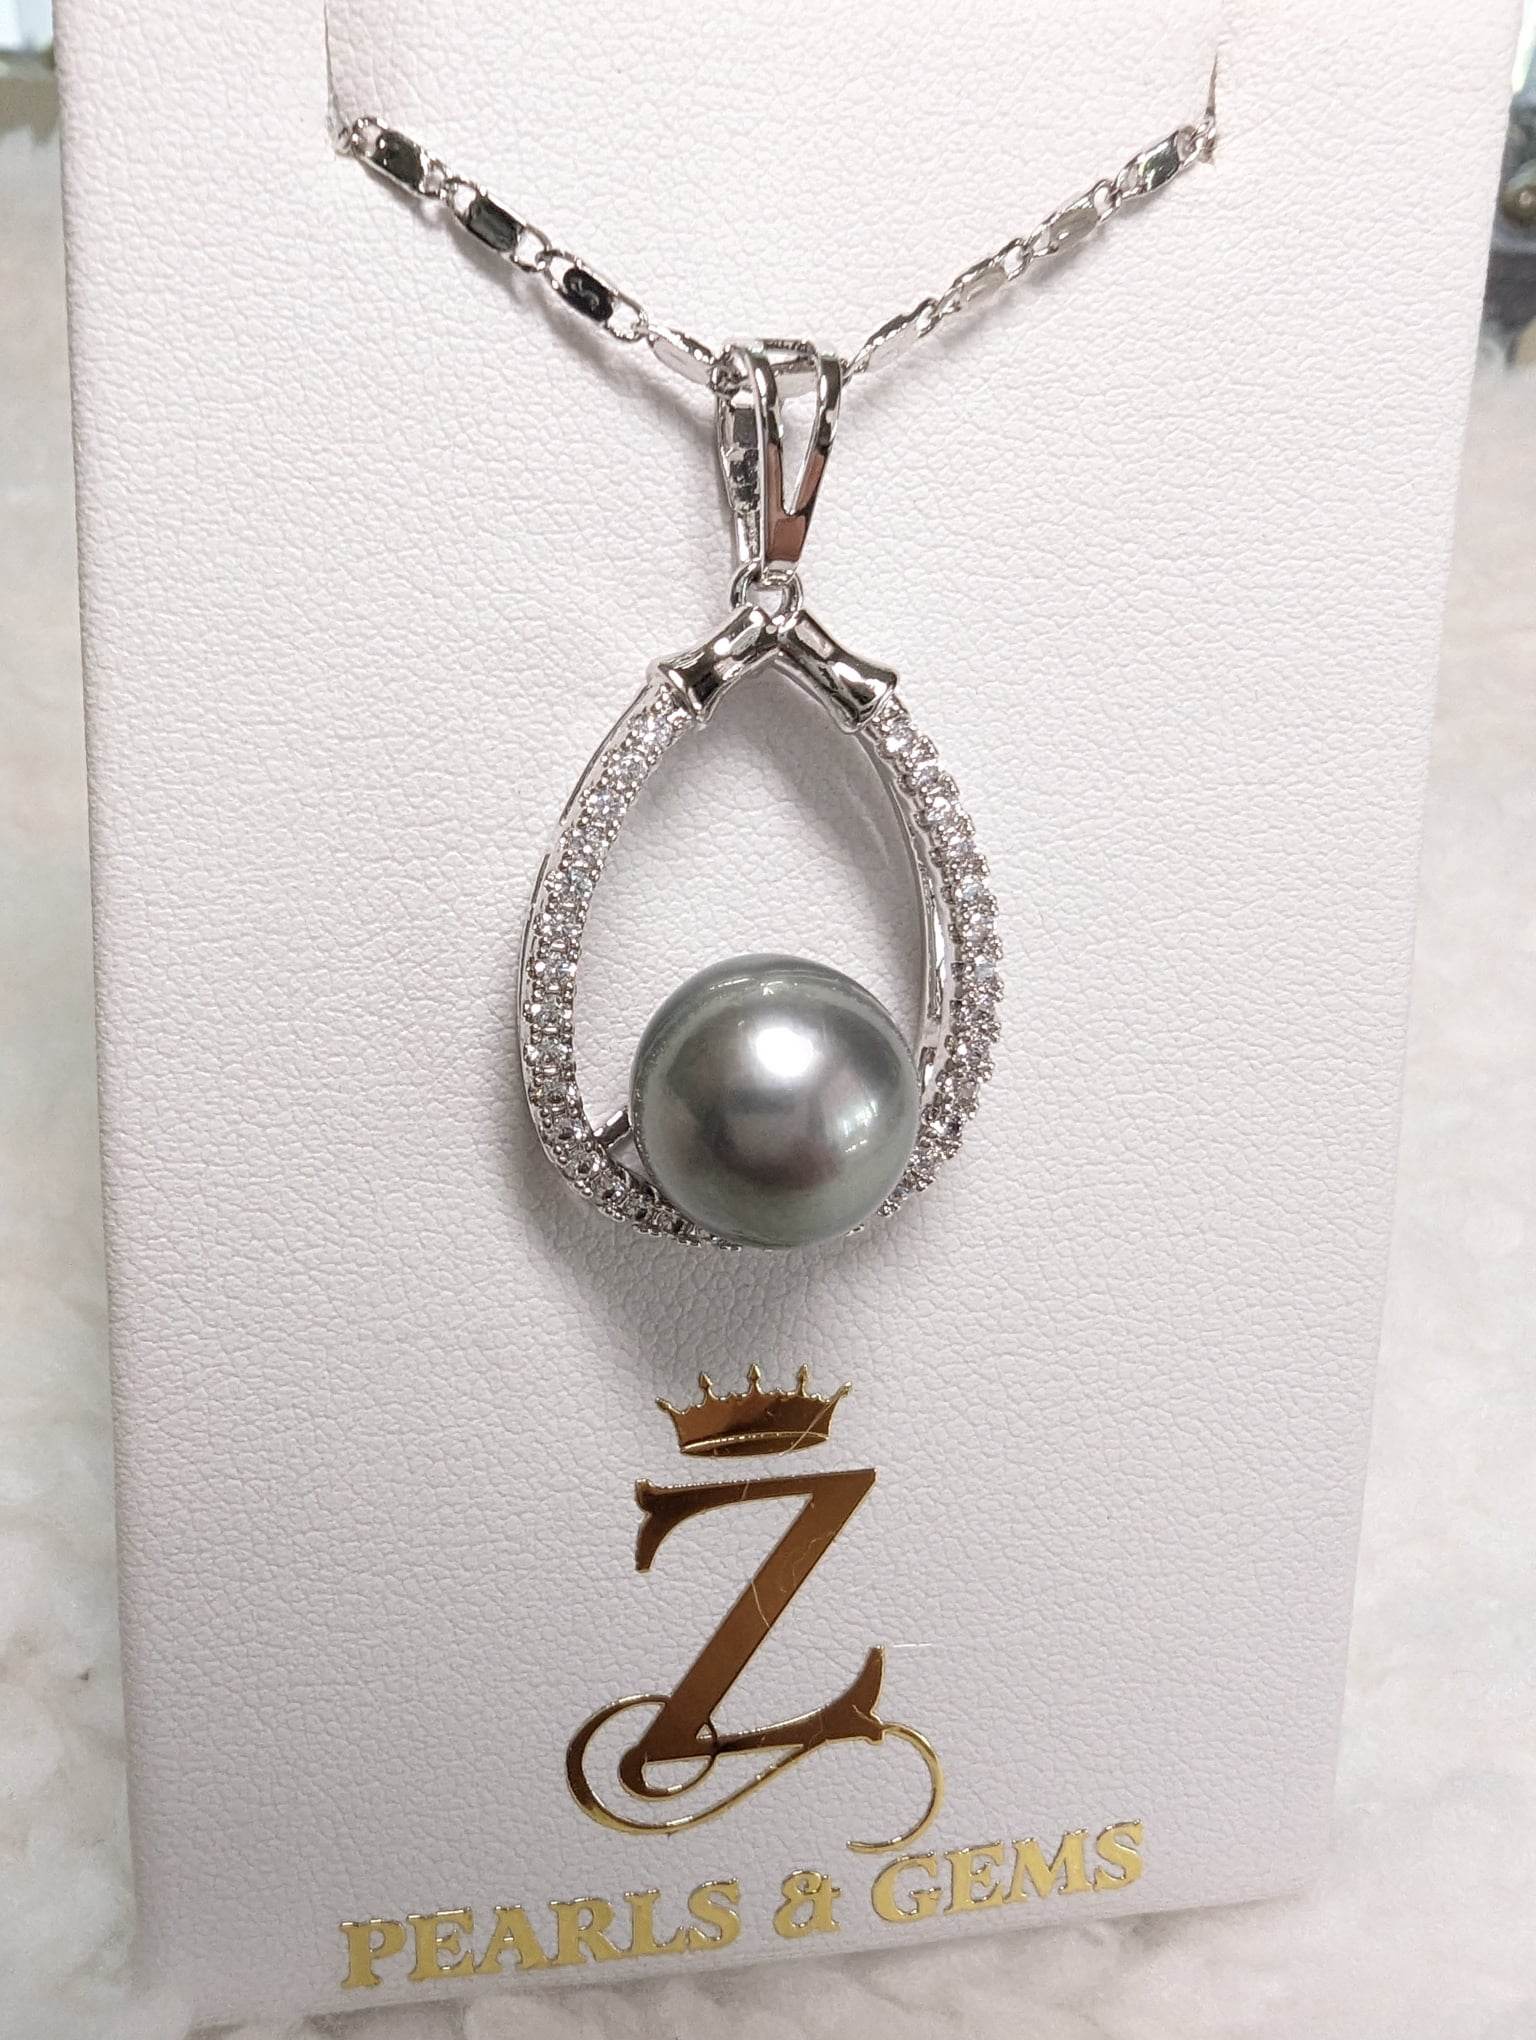 Dark greenish gray South Sea Pearl with CZ stones pendant and necklace